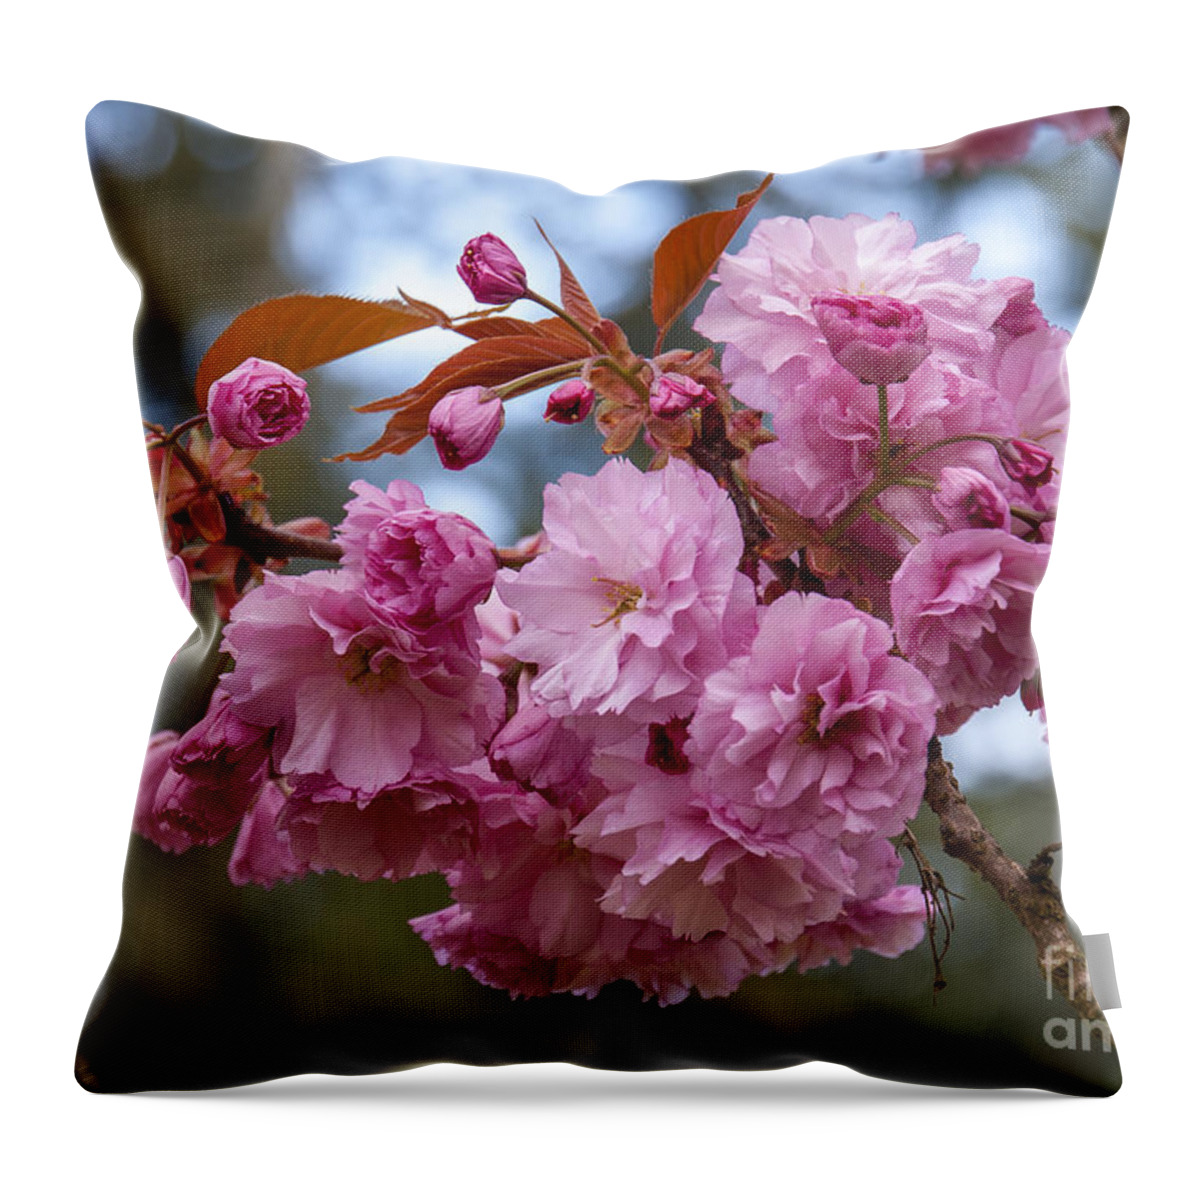 Flowering Almond Throw Pillow featuring the photograph Flowering Almond II by Chuck Flewelling